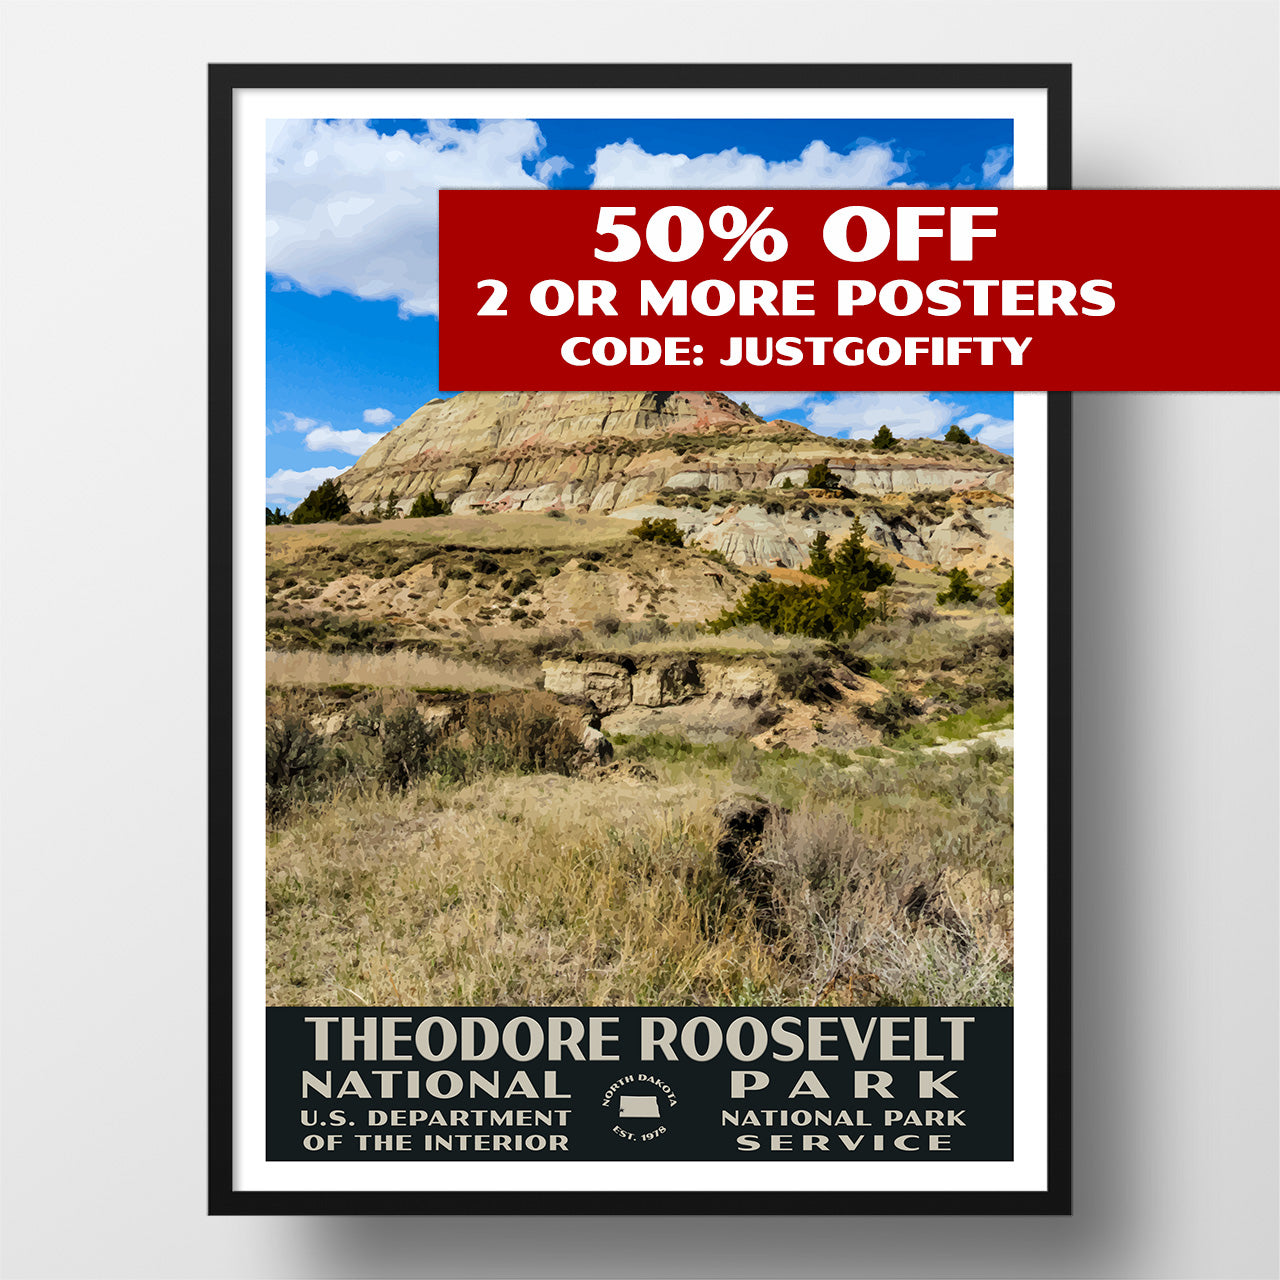 Theodore Roosevelt National Park Poster-WPA (Mesa View)